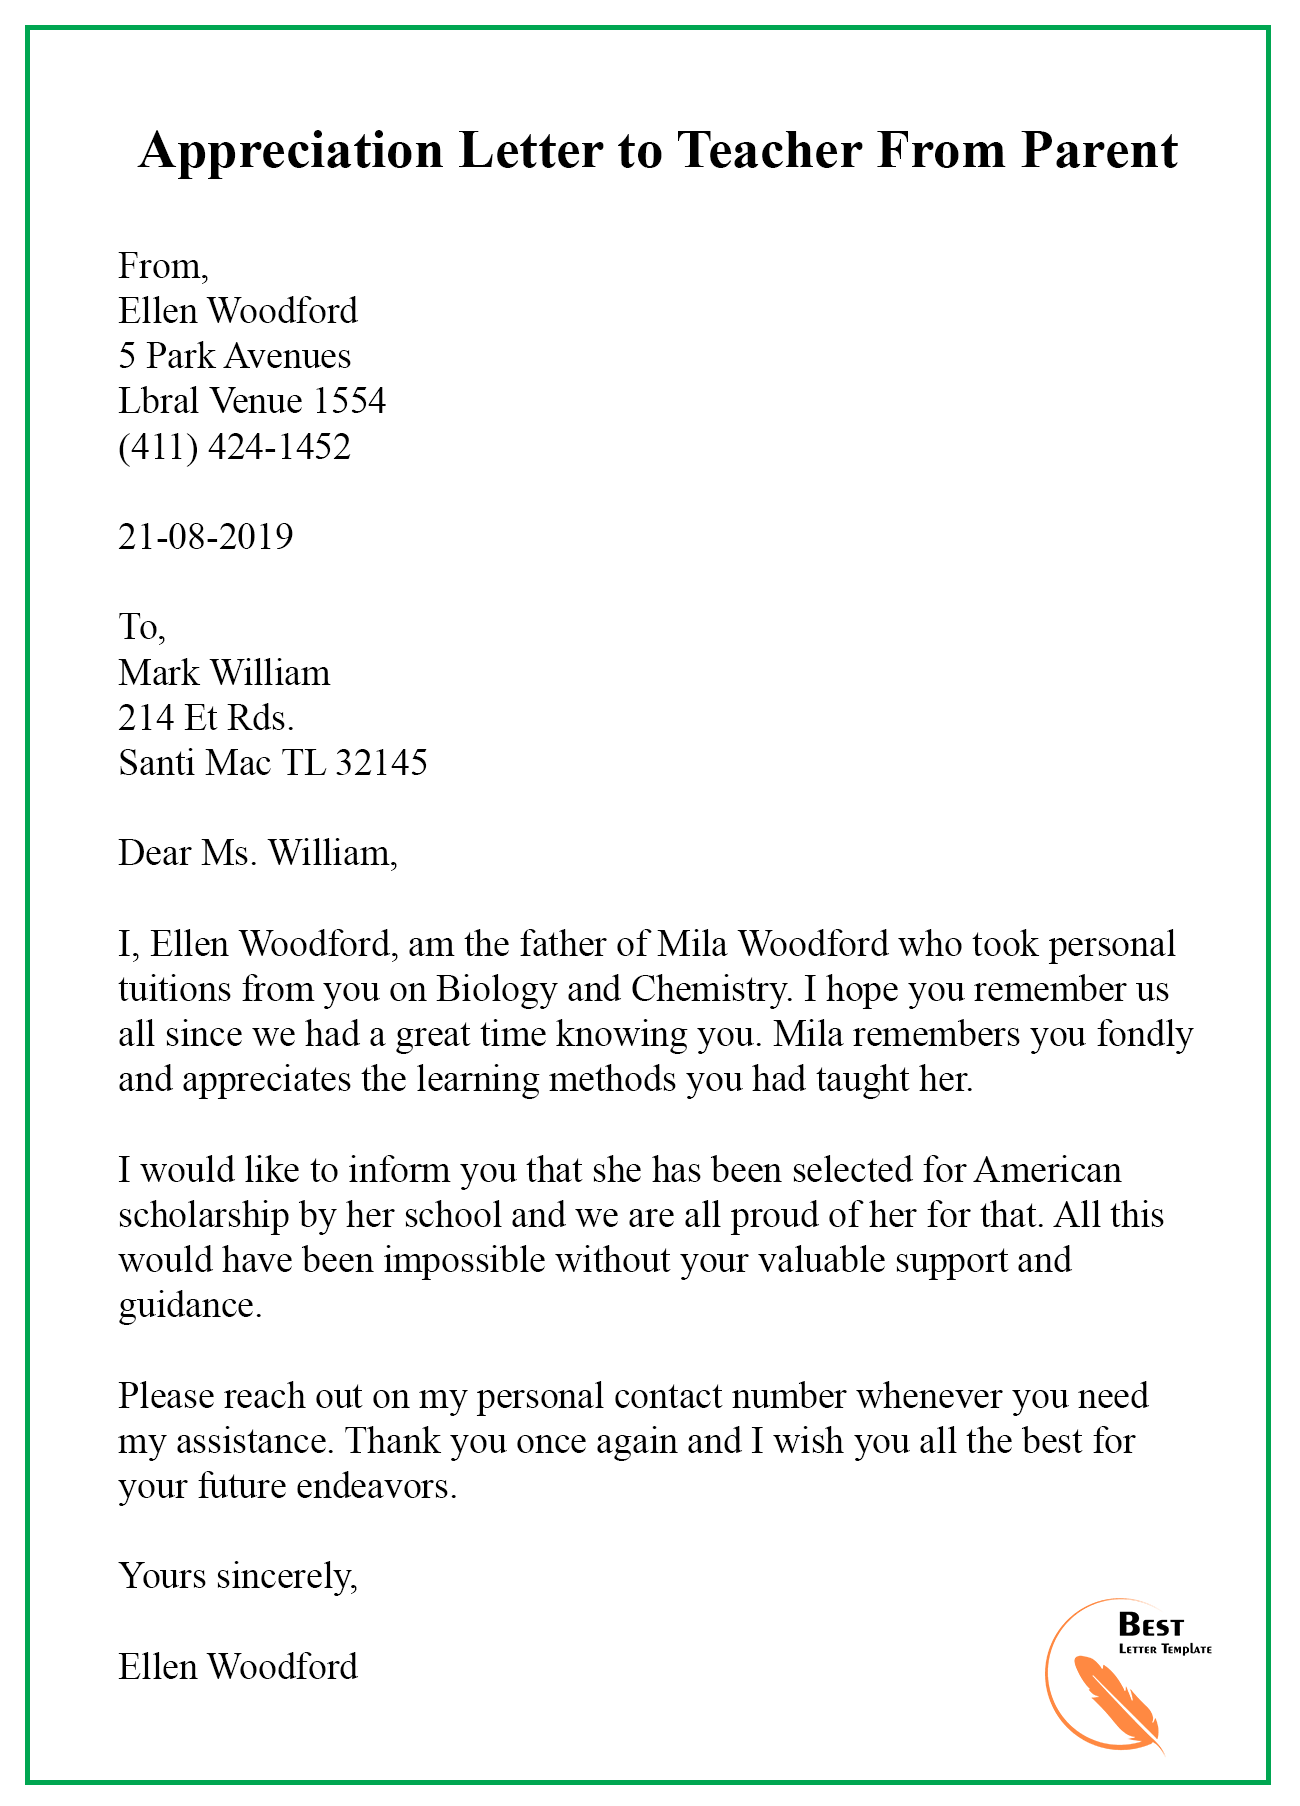 Appreciation Letter to the Teacher Format, Sample & Example